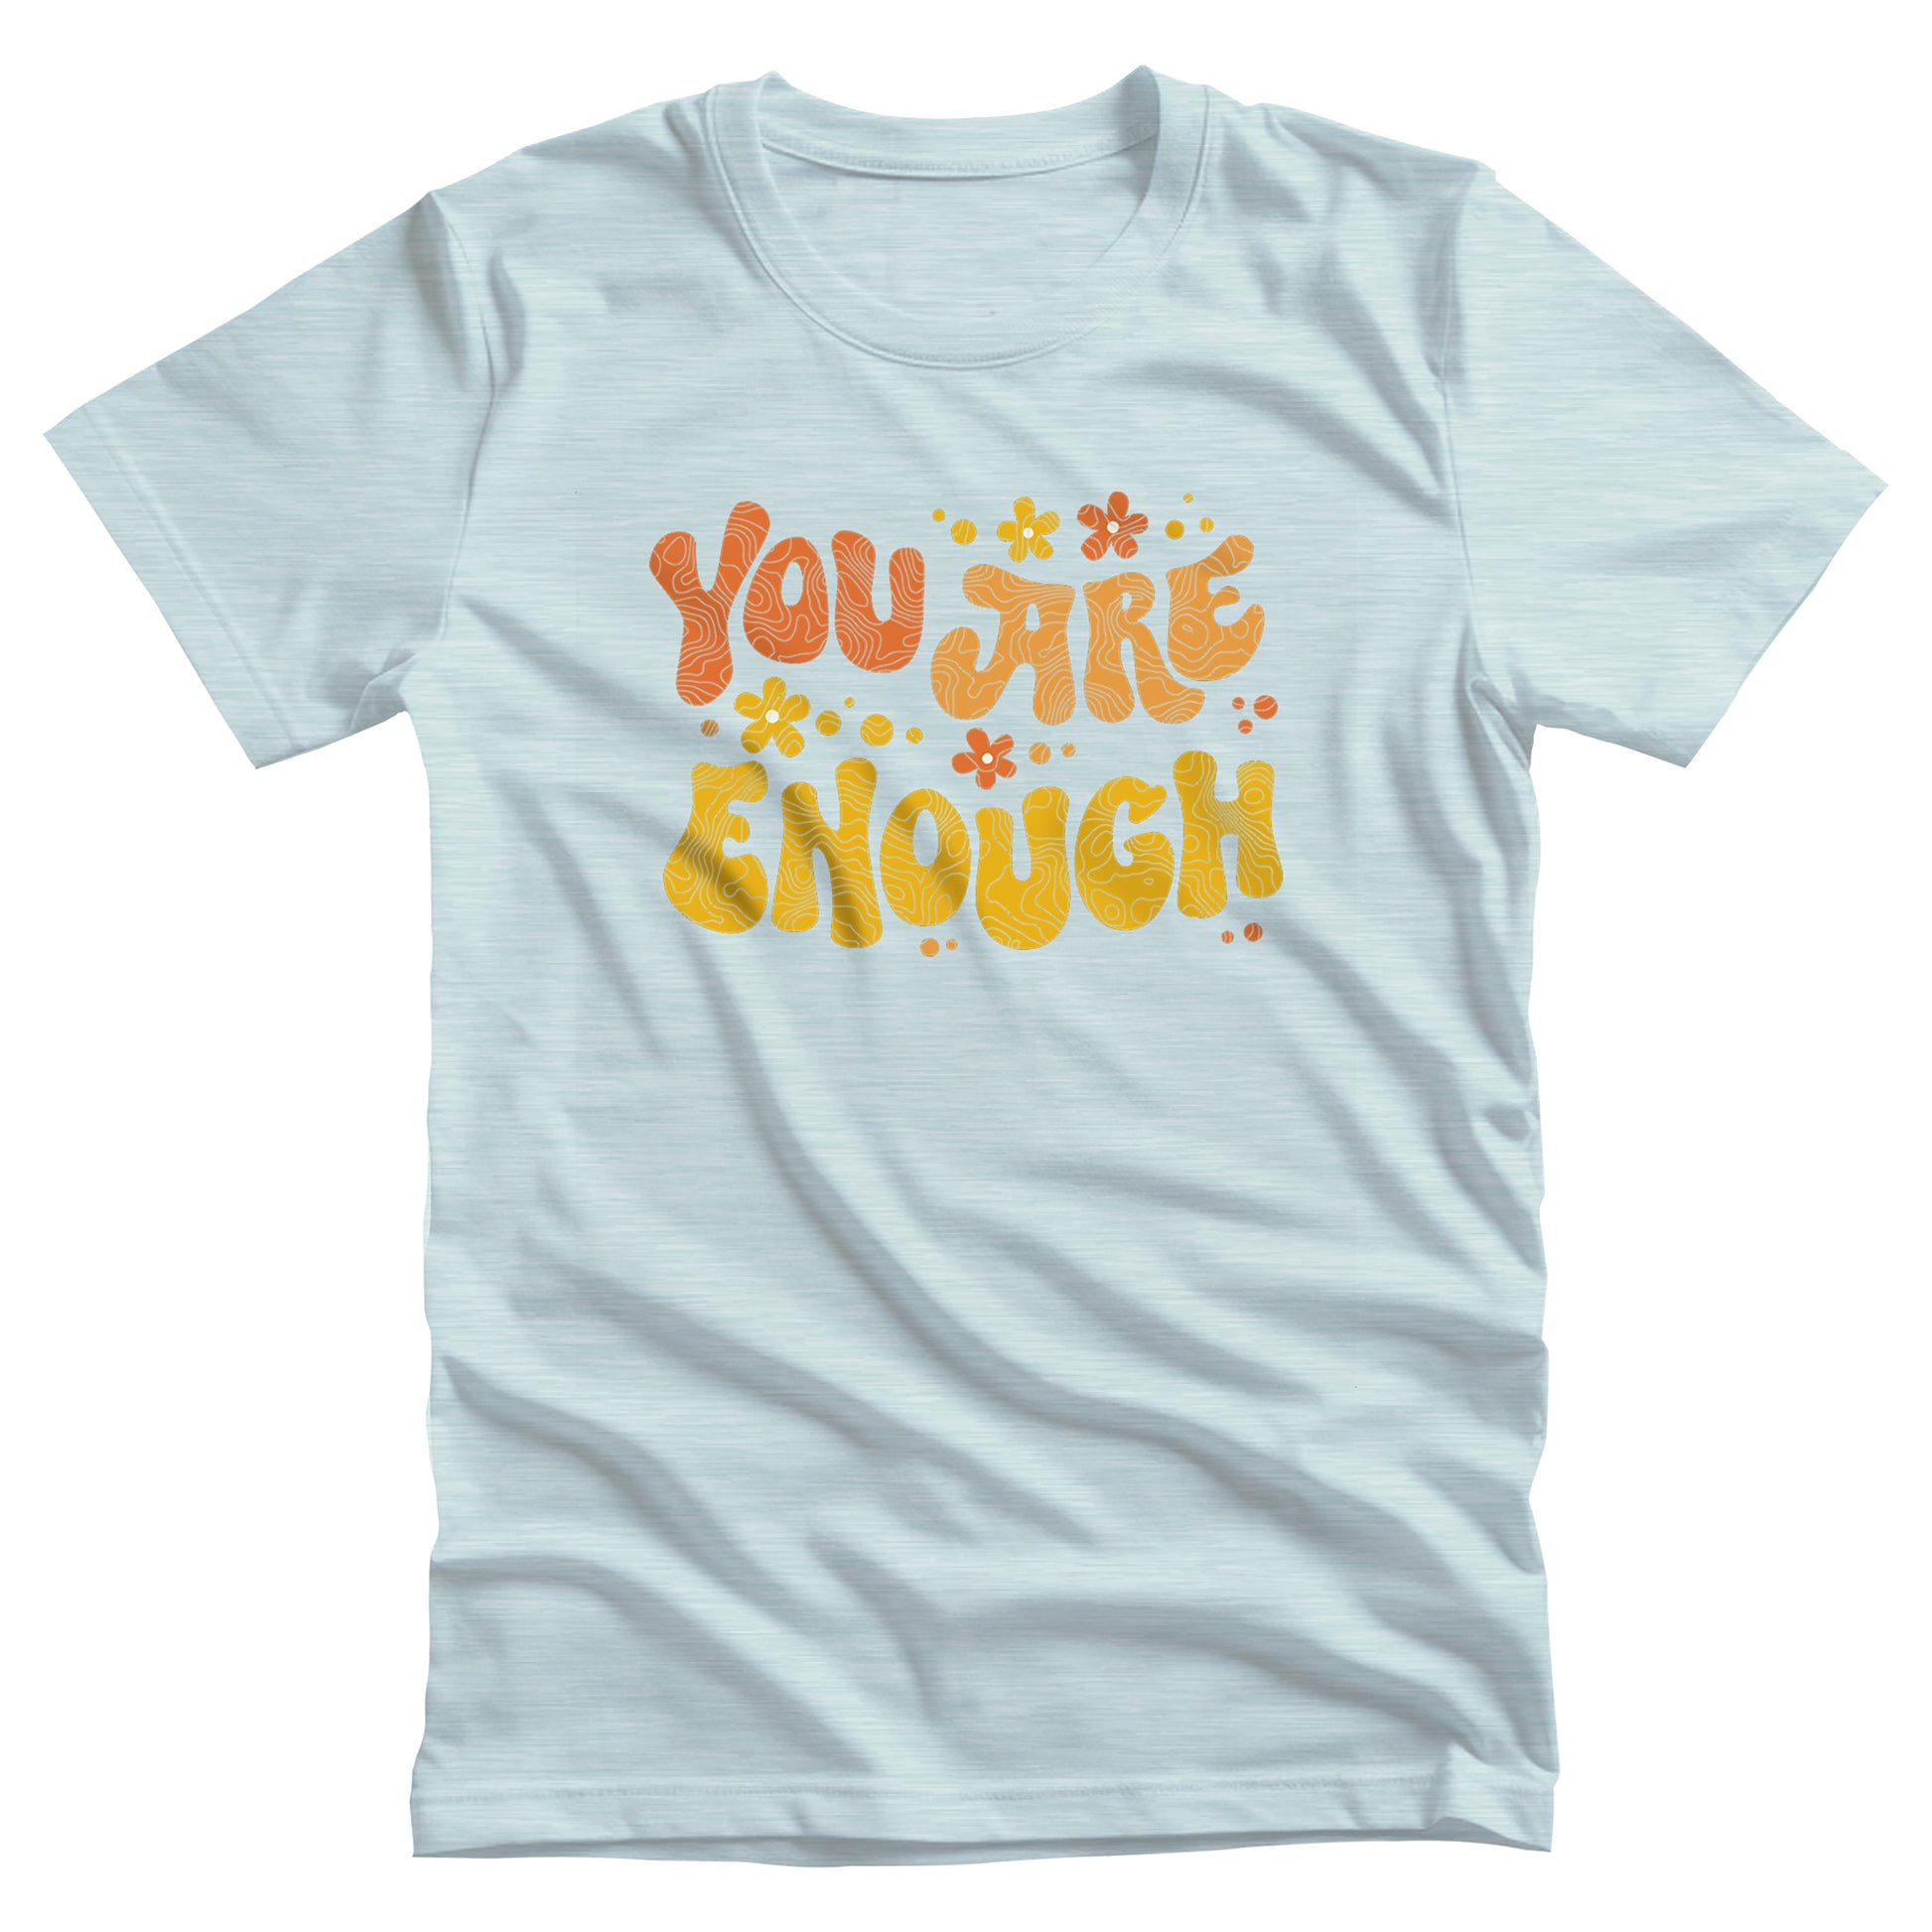 Heather Ice Blue color unisex t-shirt with a graphic that says “You Are Enough” in a retro font. There are small retro flowers spaced throughout. “You” is reddish-orange, “Are” is orange, and “Enough” is yellow, all retro as well.